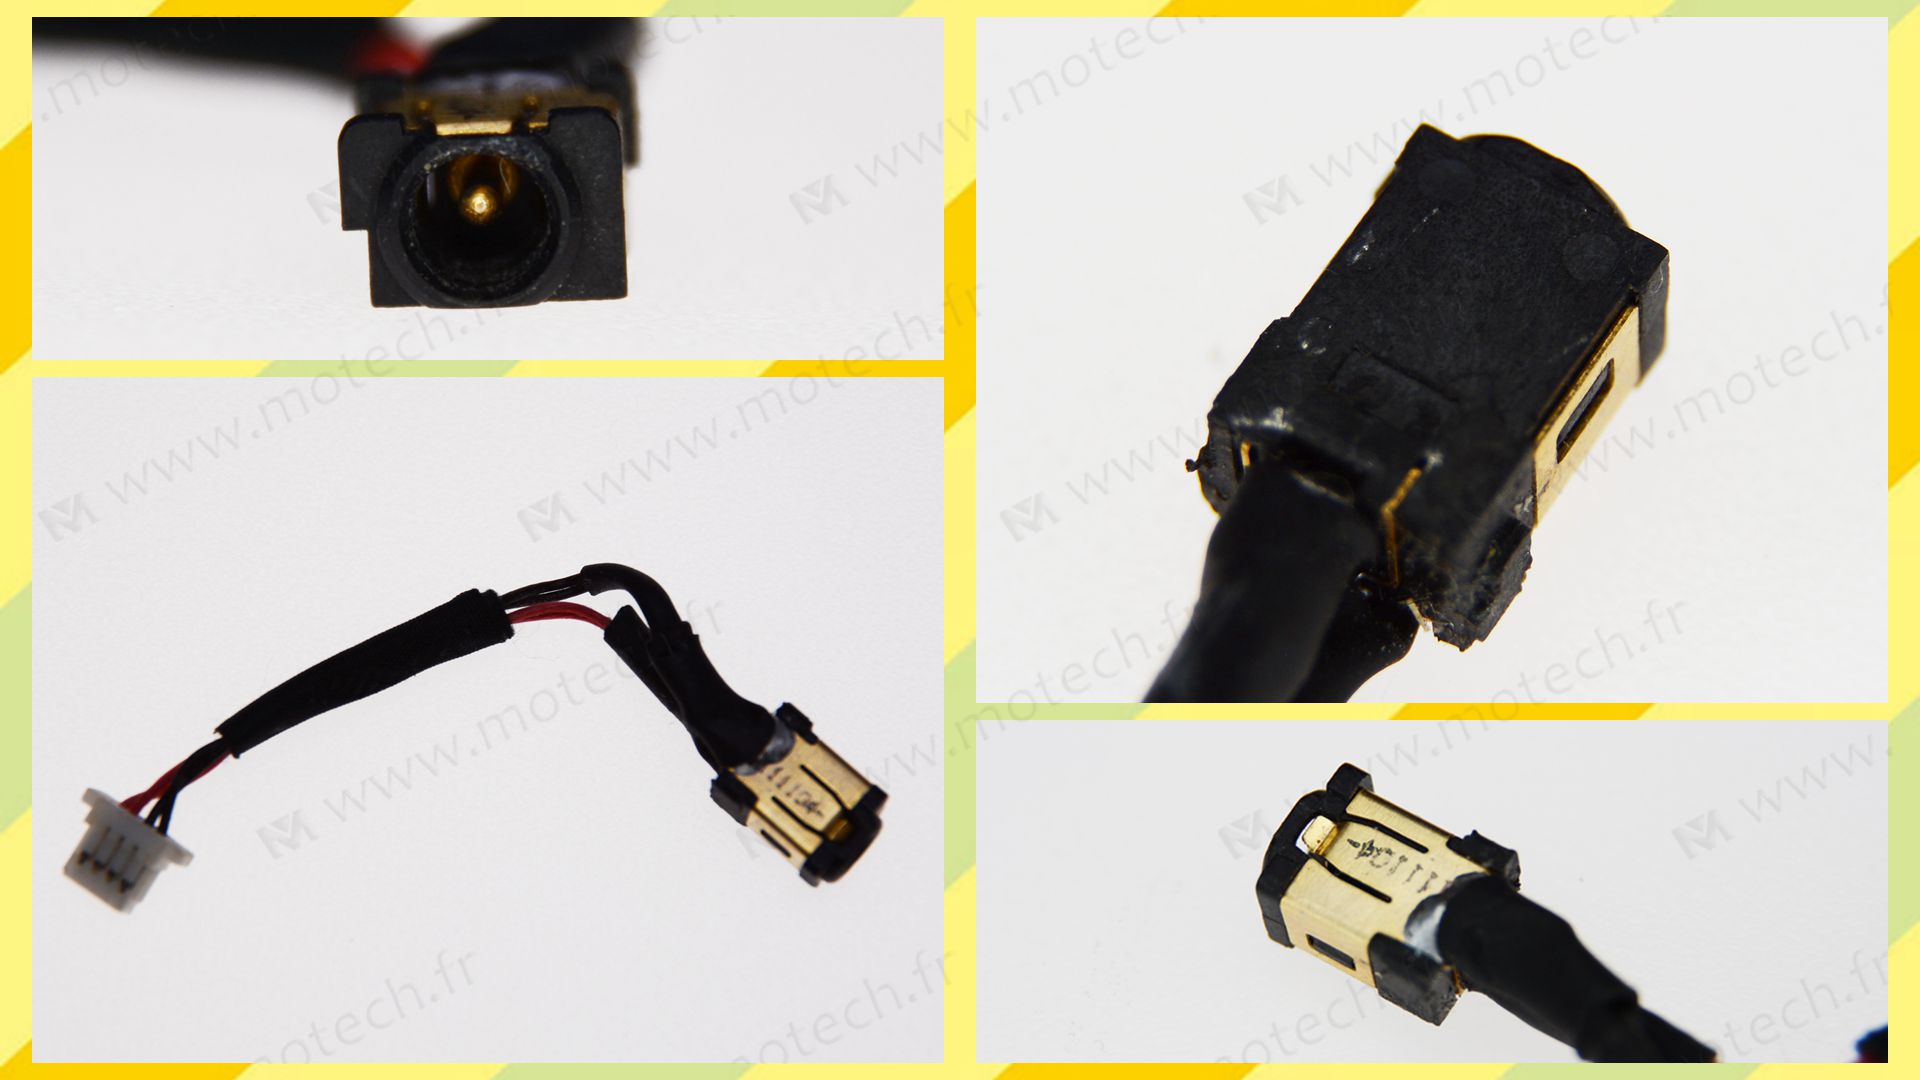 Acer S7-391 charging connector, Acer S7-391 DC Power Jack, Acer S7-391 DC IN Cable, Acer S7-391 Power Jack, Acer S7-391 plug, Acer S7-391 Jack socket, Acer S7-391 connecteur de charge, 